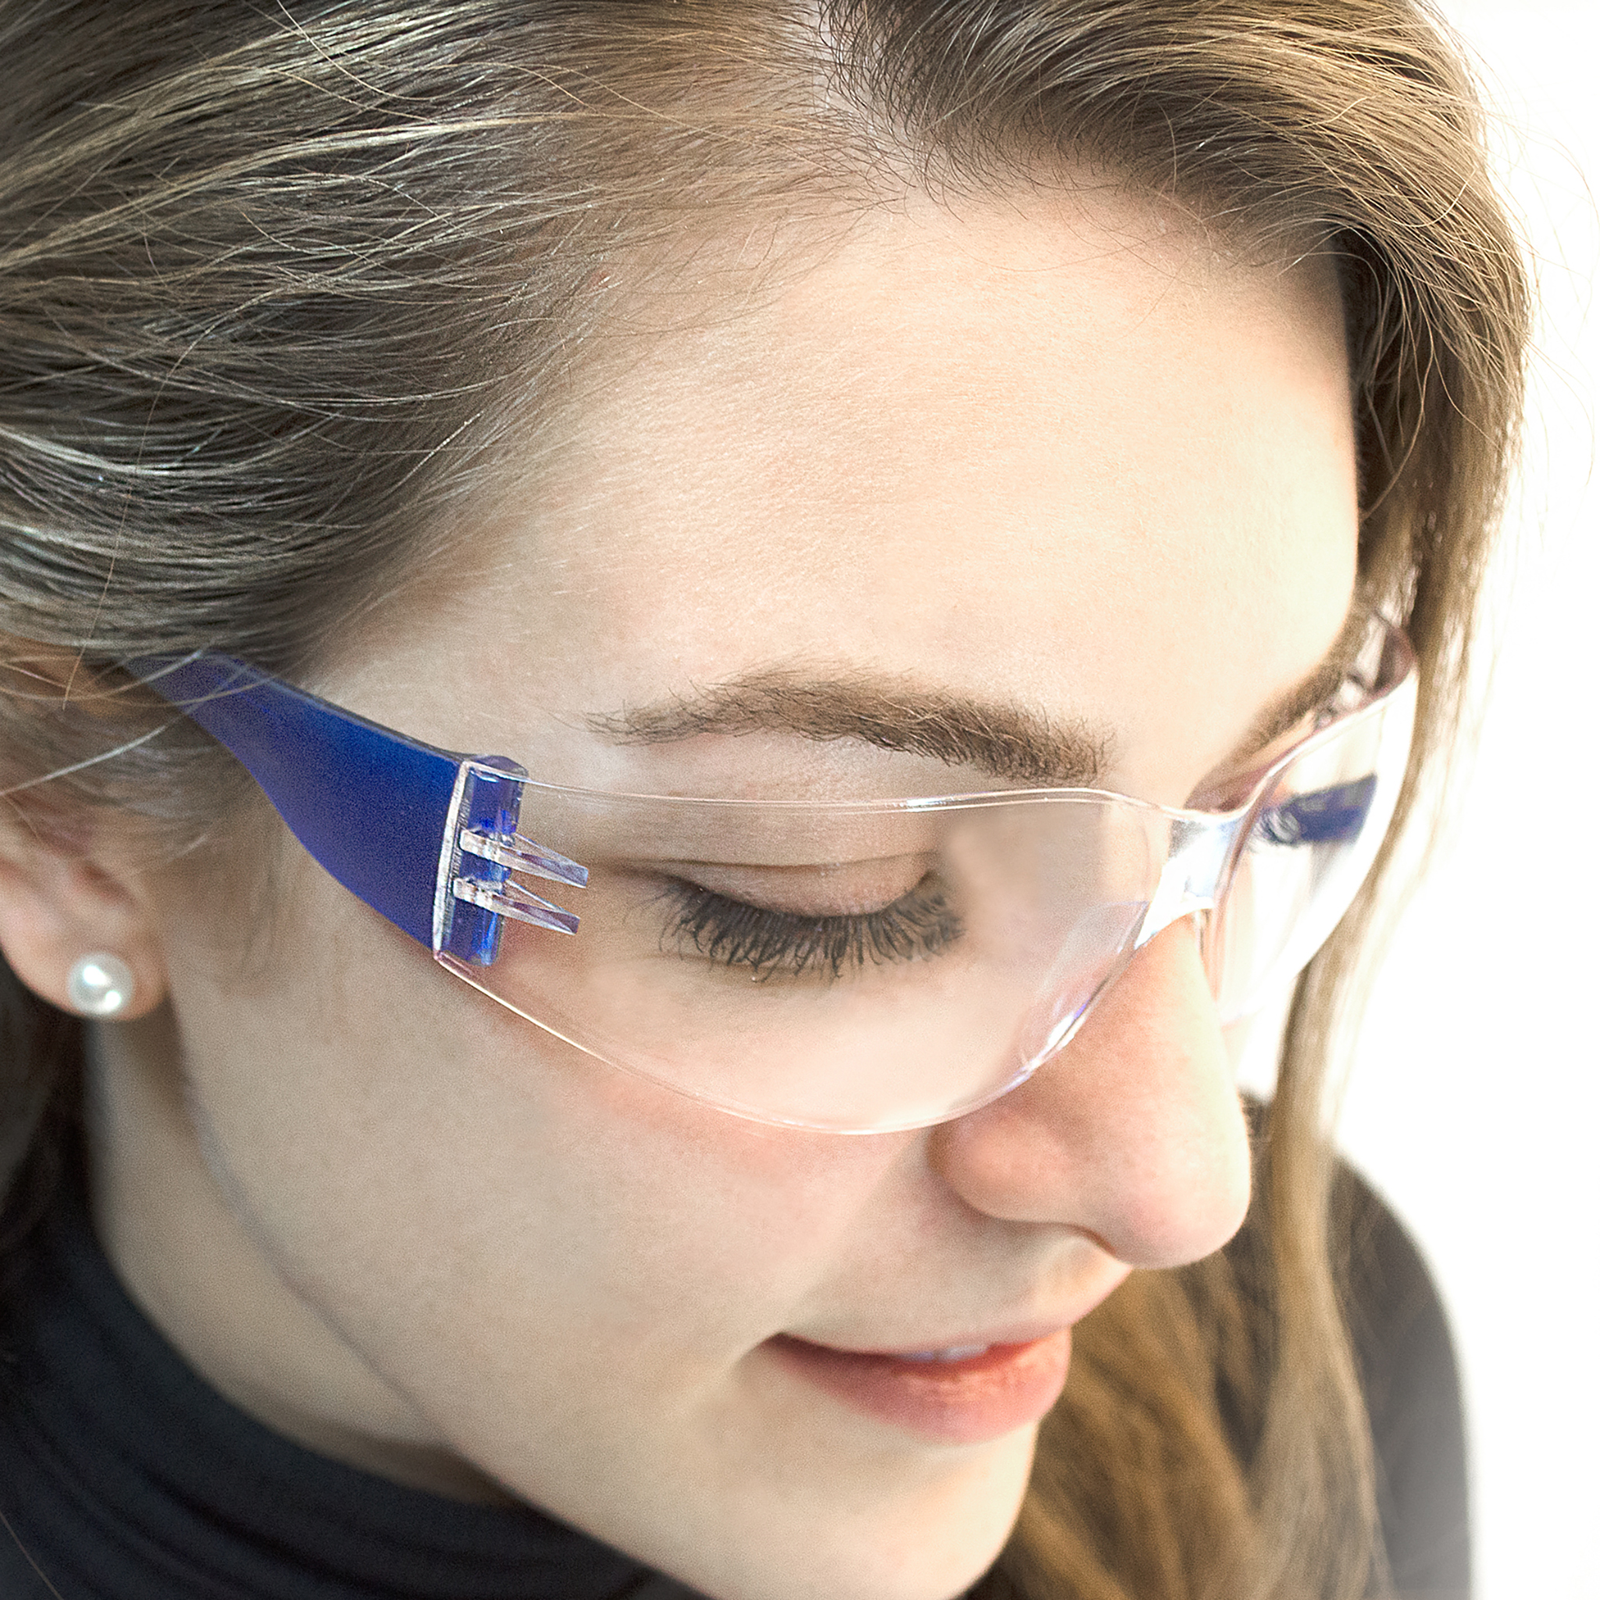 A woman wearing the clear and blue JORESTECH ANSI compliant safety glasses for high impact